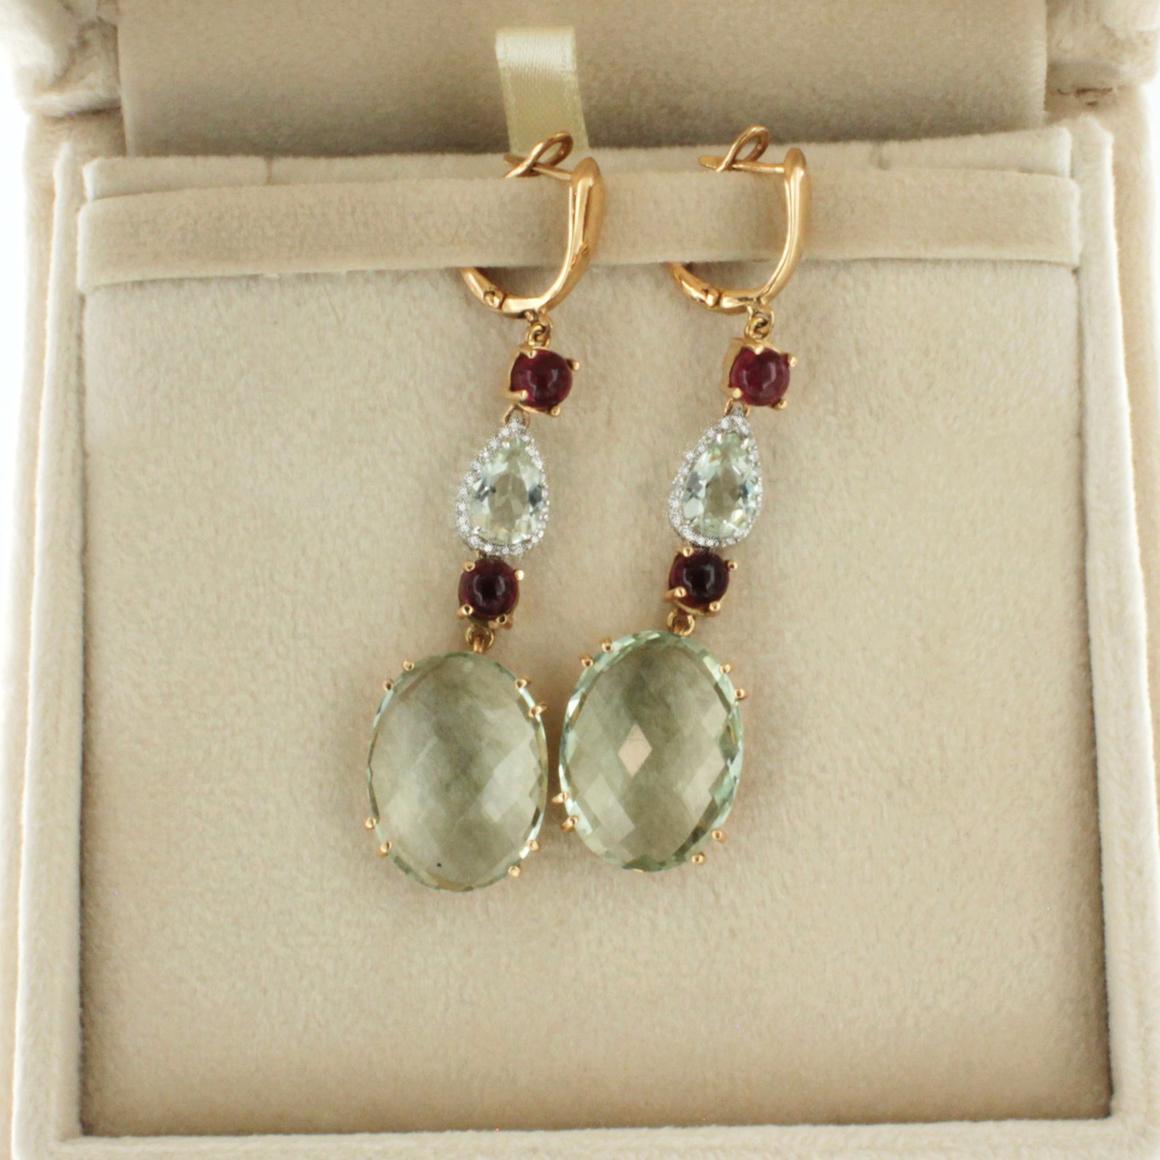 Oval Cut 18k Rose White Gold with Prasiolite Pink Tourmaline and White Diamonds Earrings